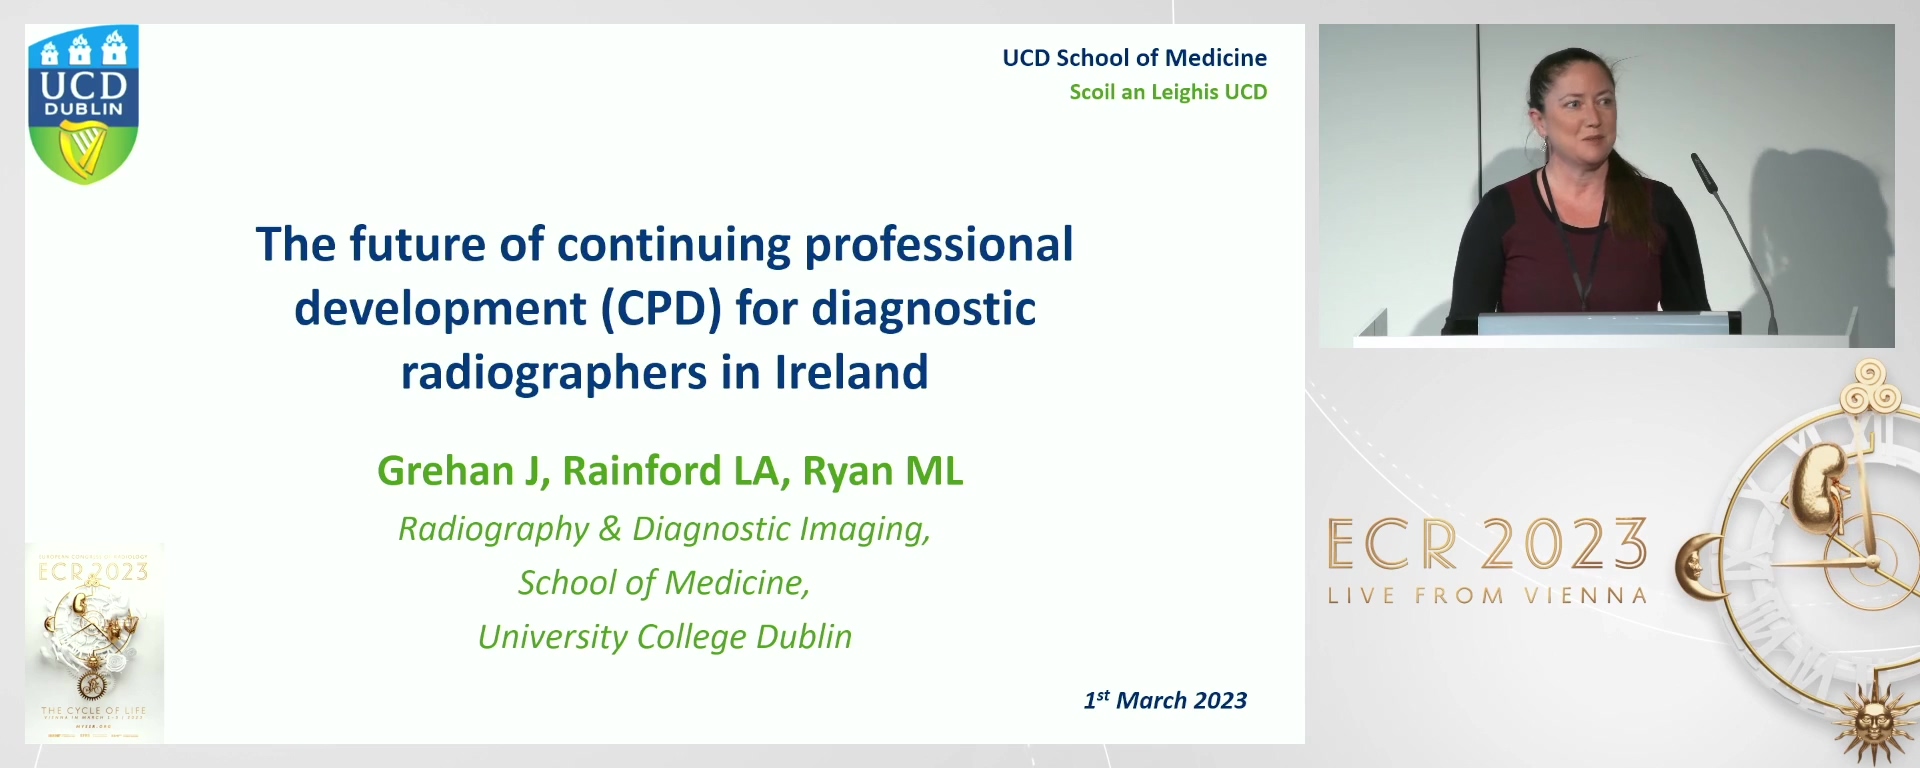 The future of continuing professional development (CPD) for diagnostic radiographers in Ireland - Jennifer Mary  Grehan, Dublin / IE